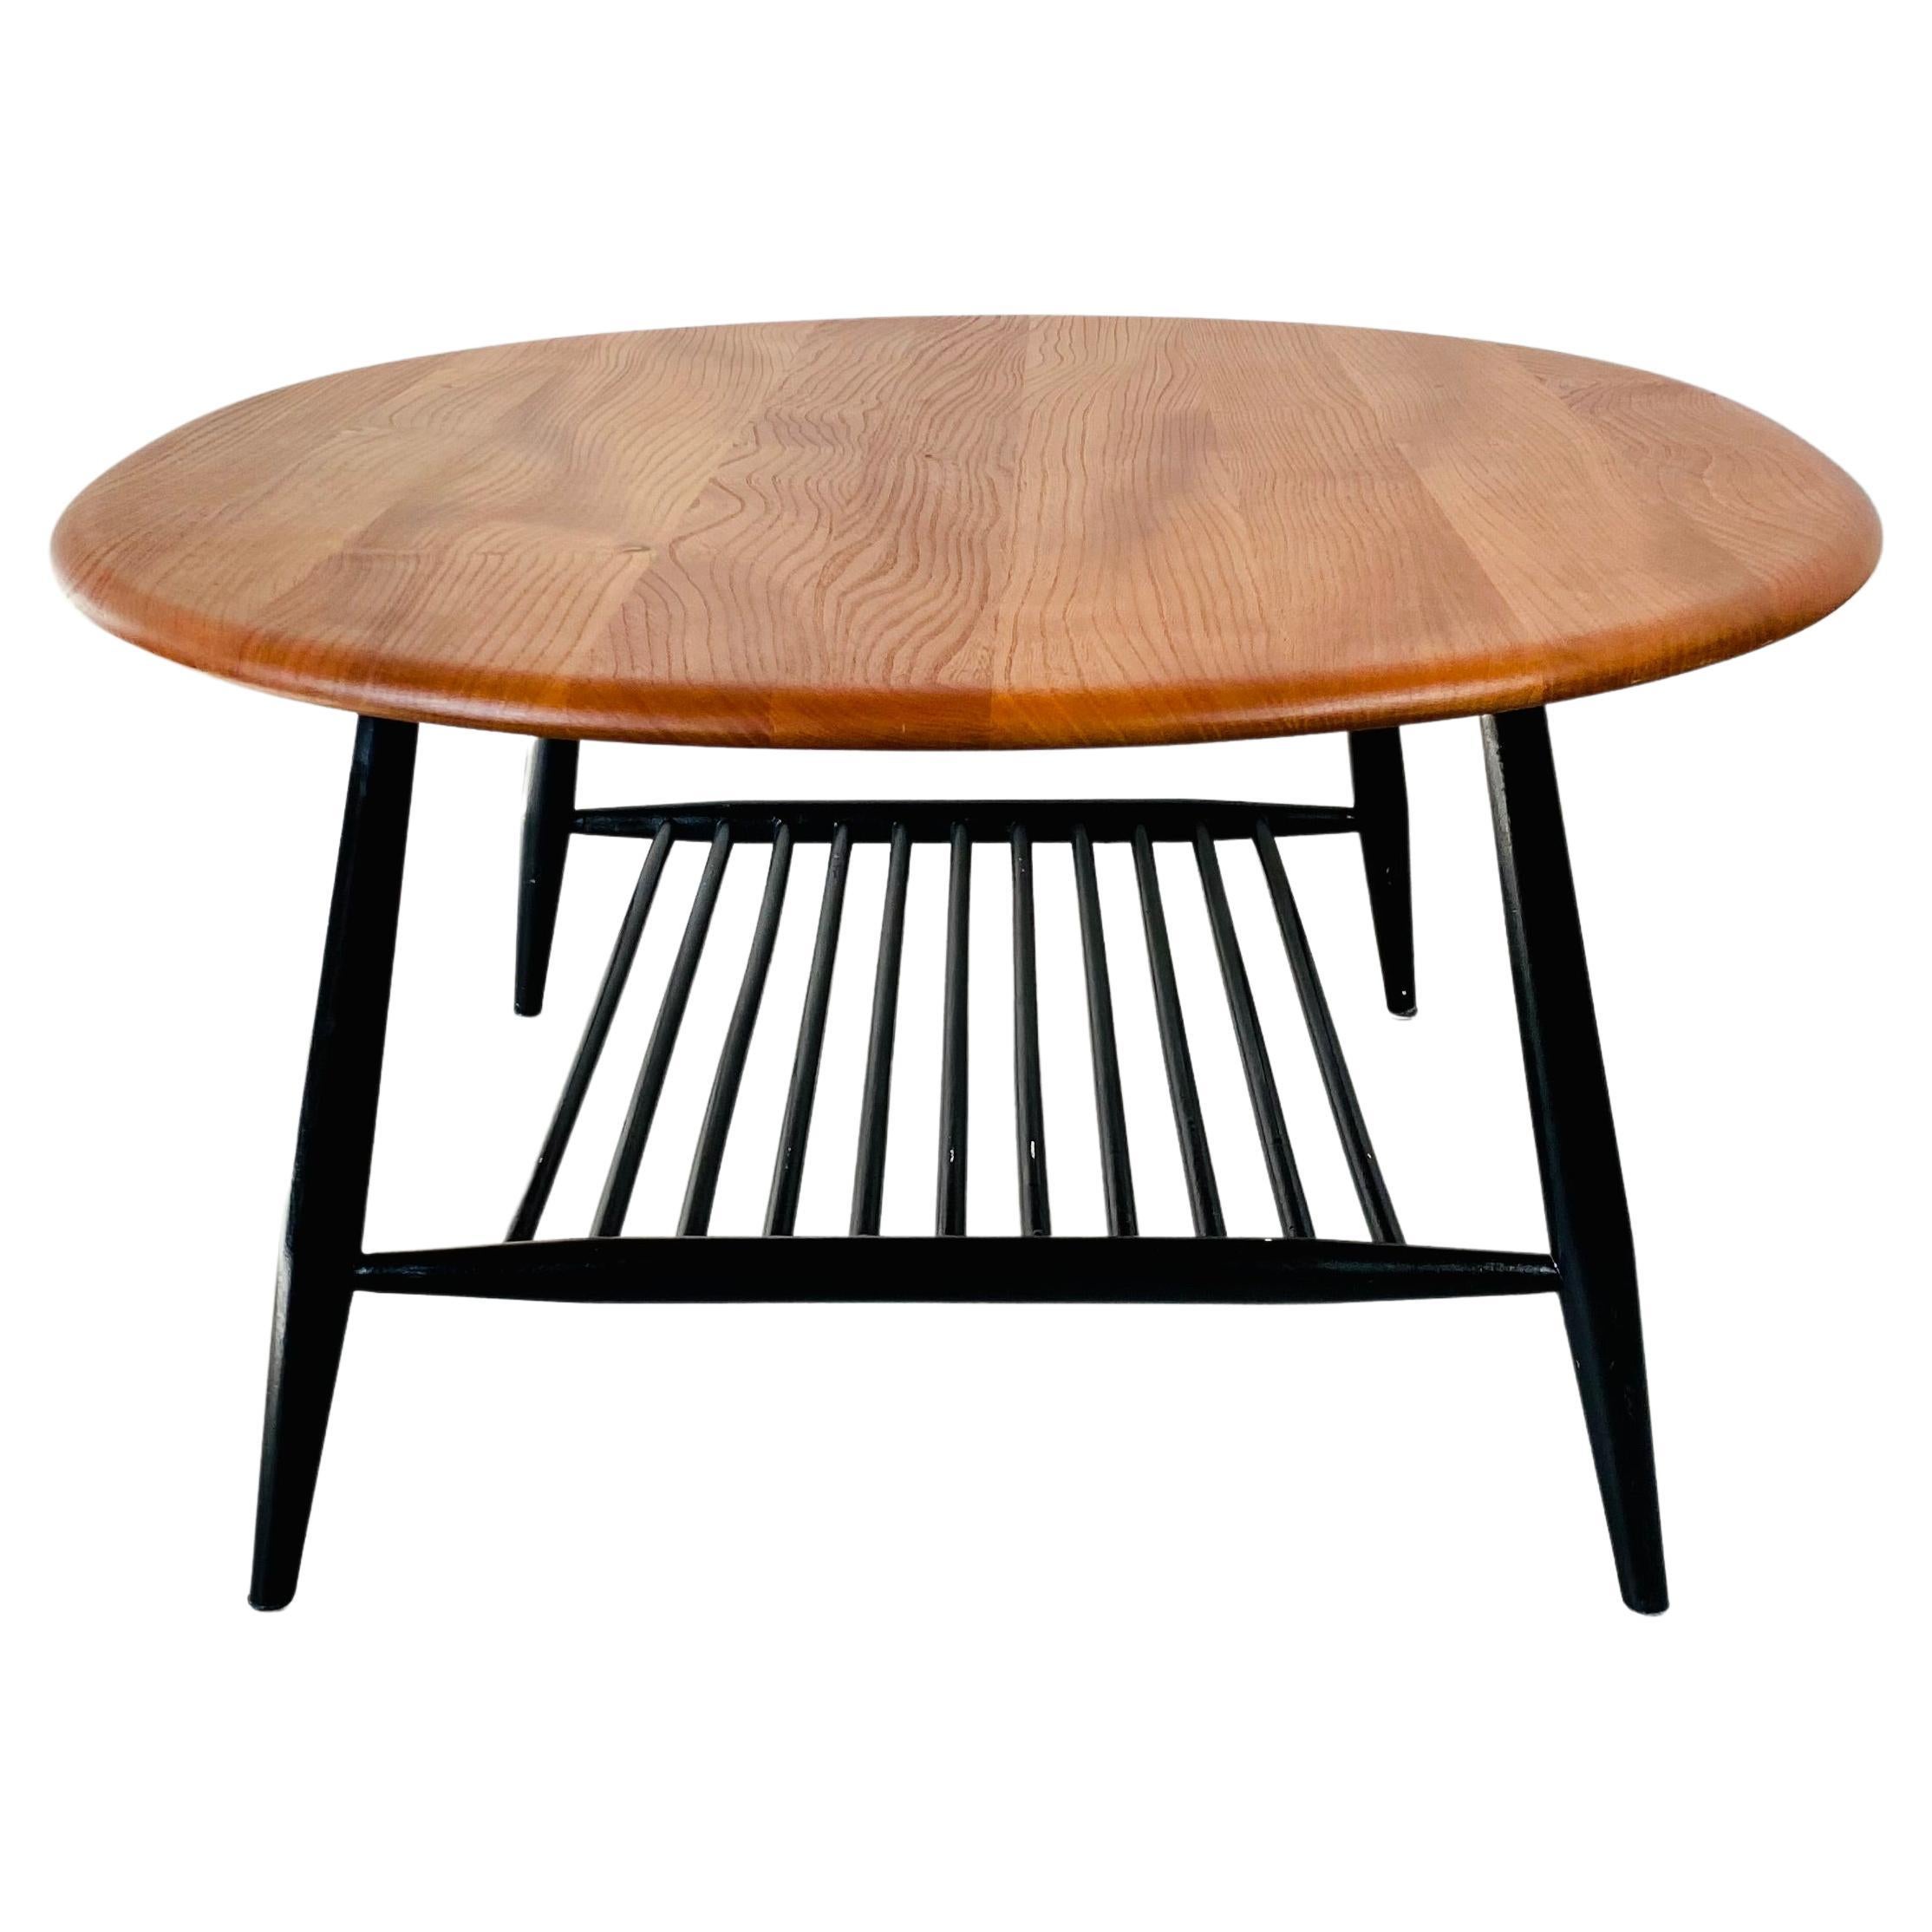 Large Oval Coffee Table by Lucian Ercolani for Ercol, United Kingdom, 1970 For Sale